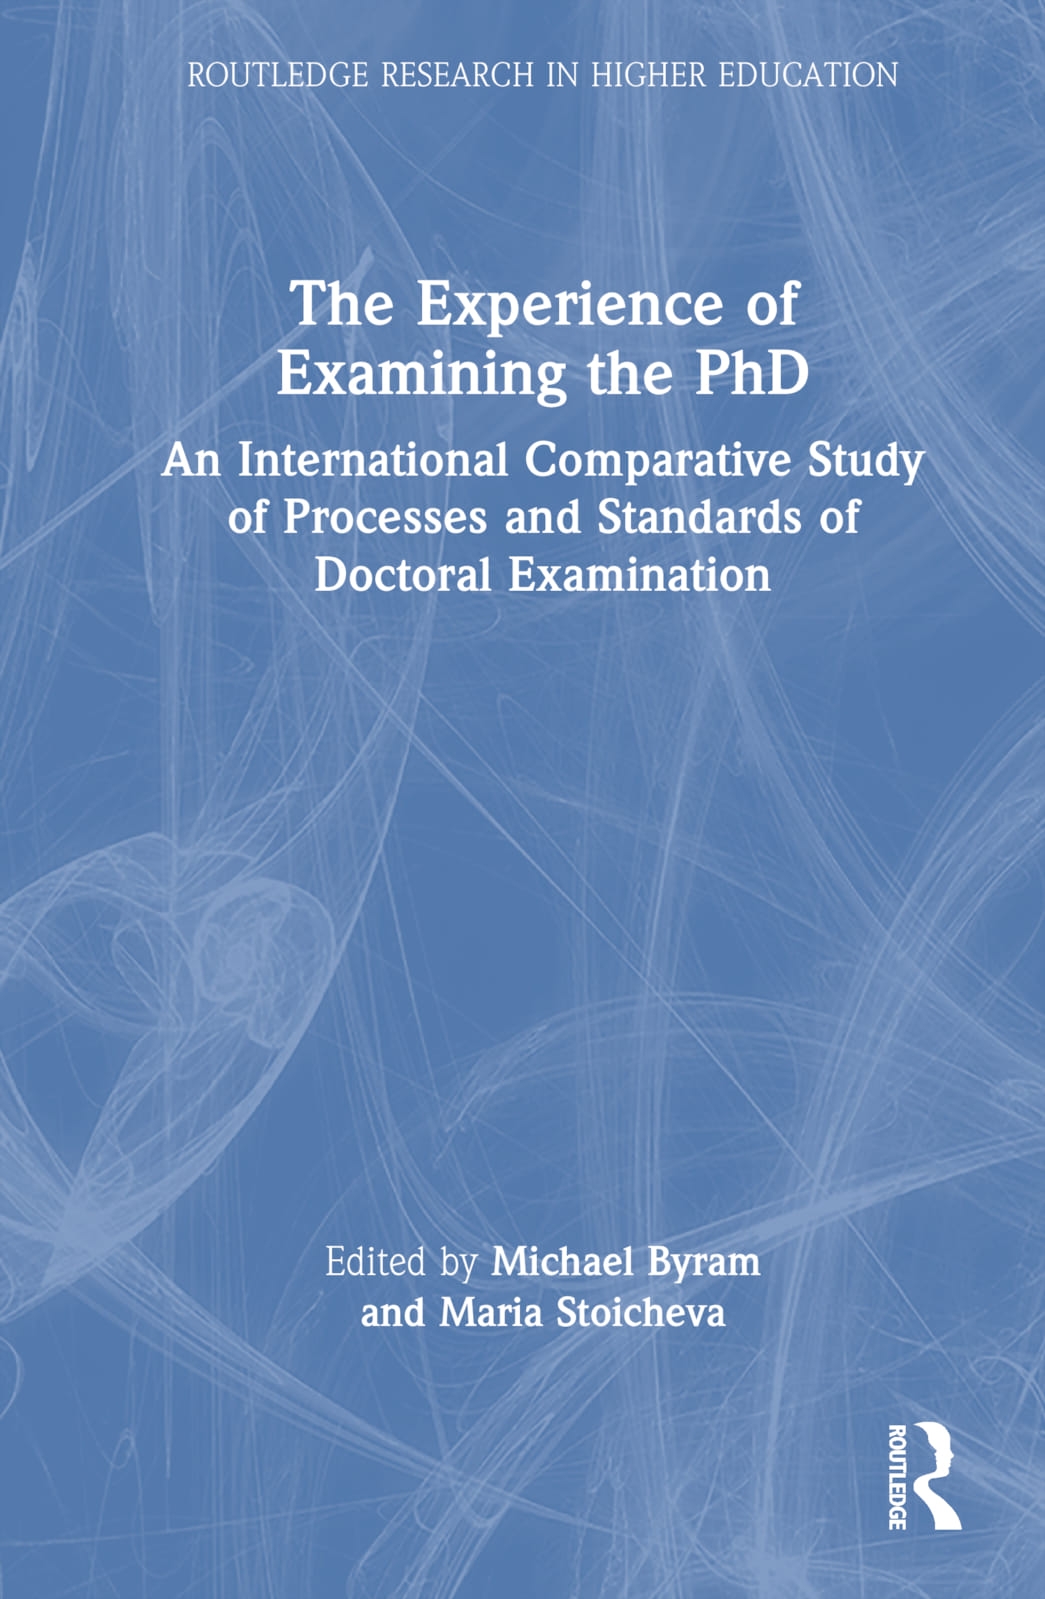 The Experience of Examining the PhD: An International Comparative Study of Processes and Standards of Doctoral Examination